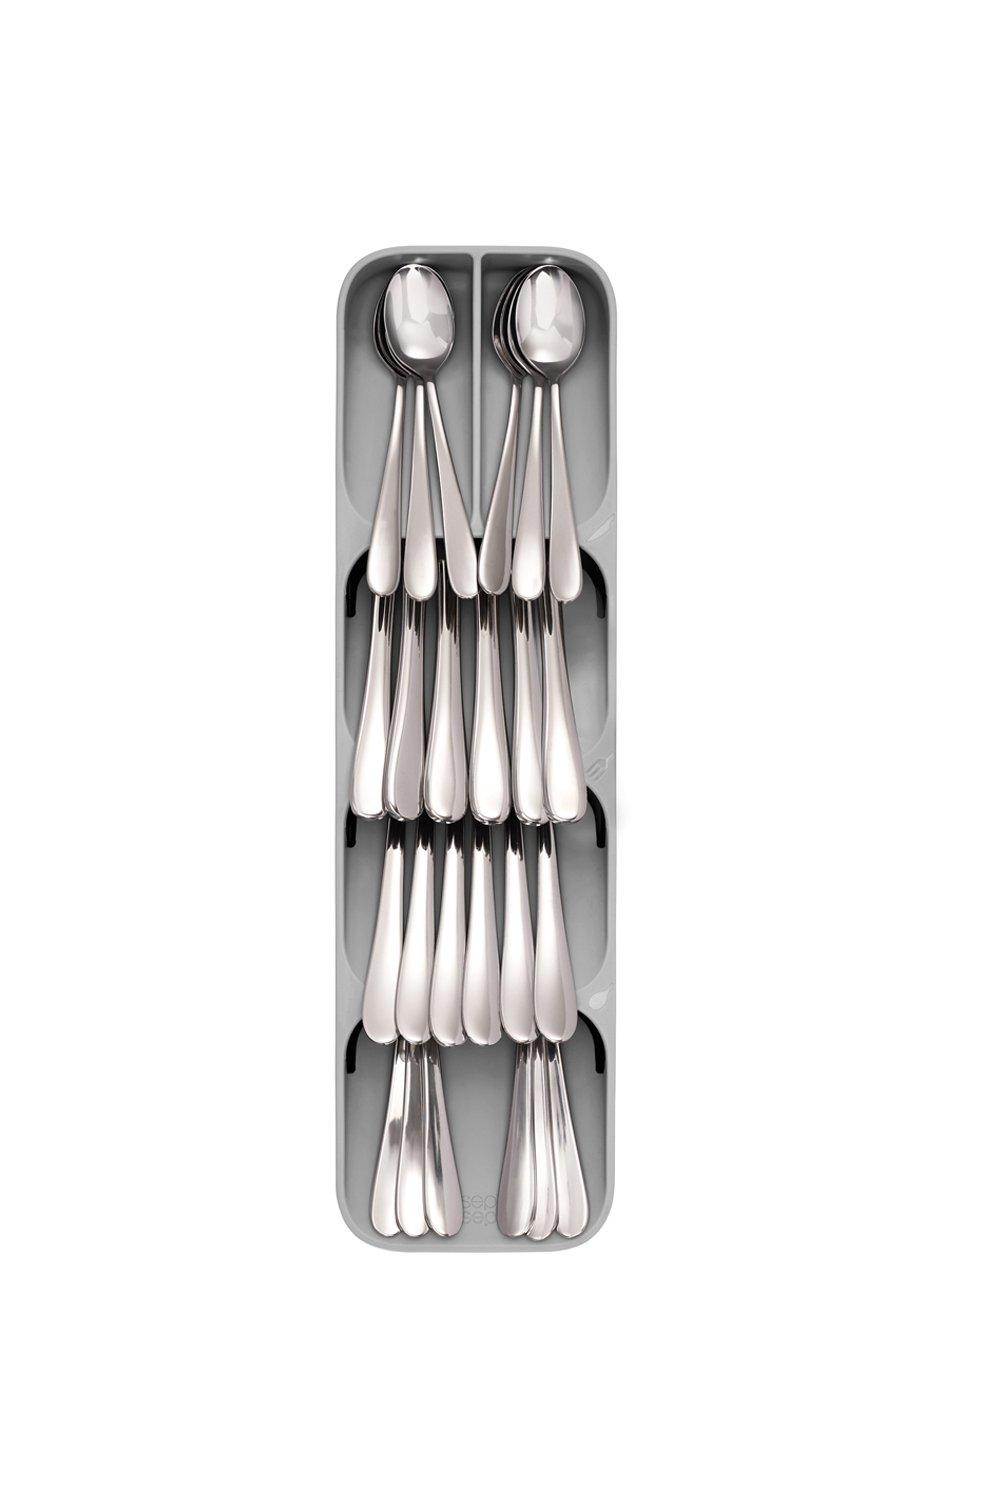 Picture of Drawerstore Compact Cutlery Organiser